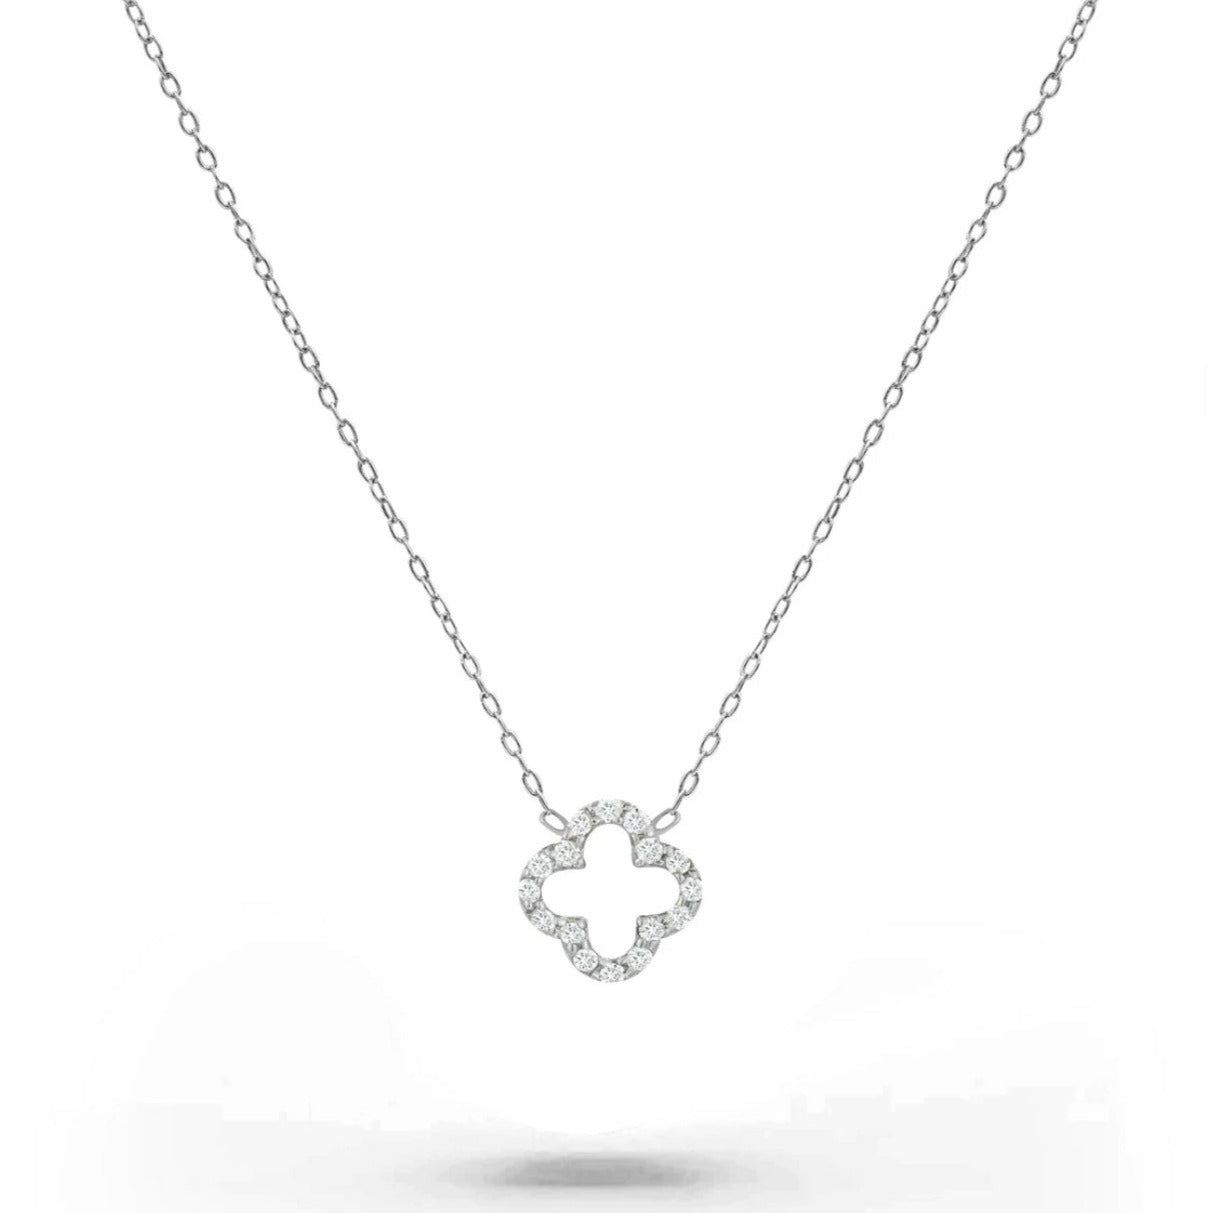 silver clover leaf jewelry clover white gold necklace 